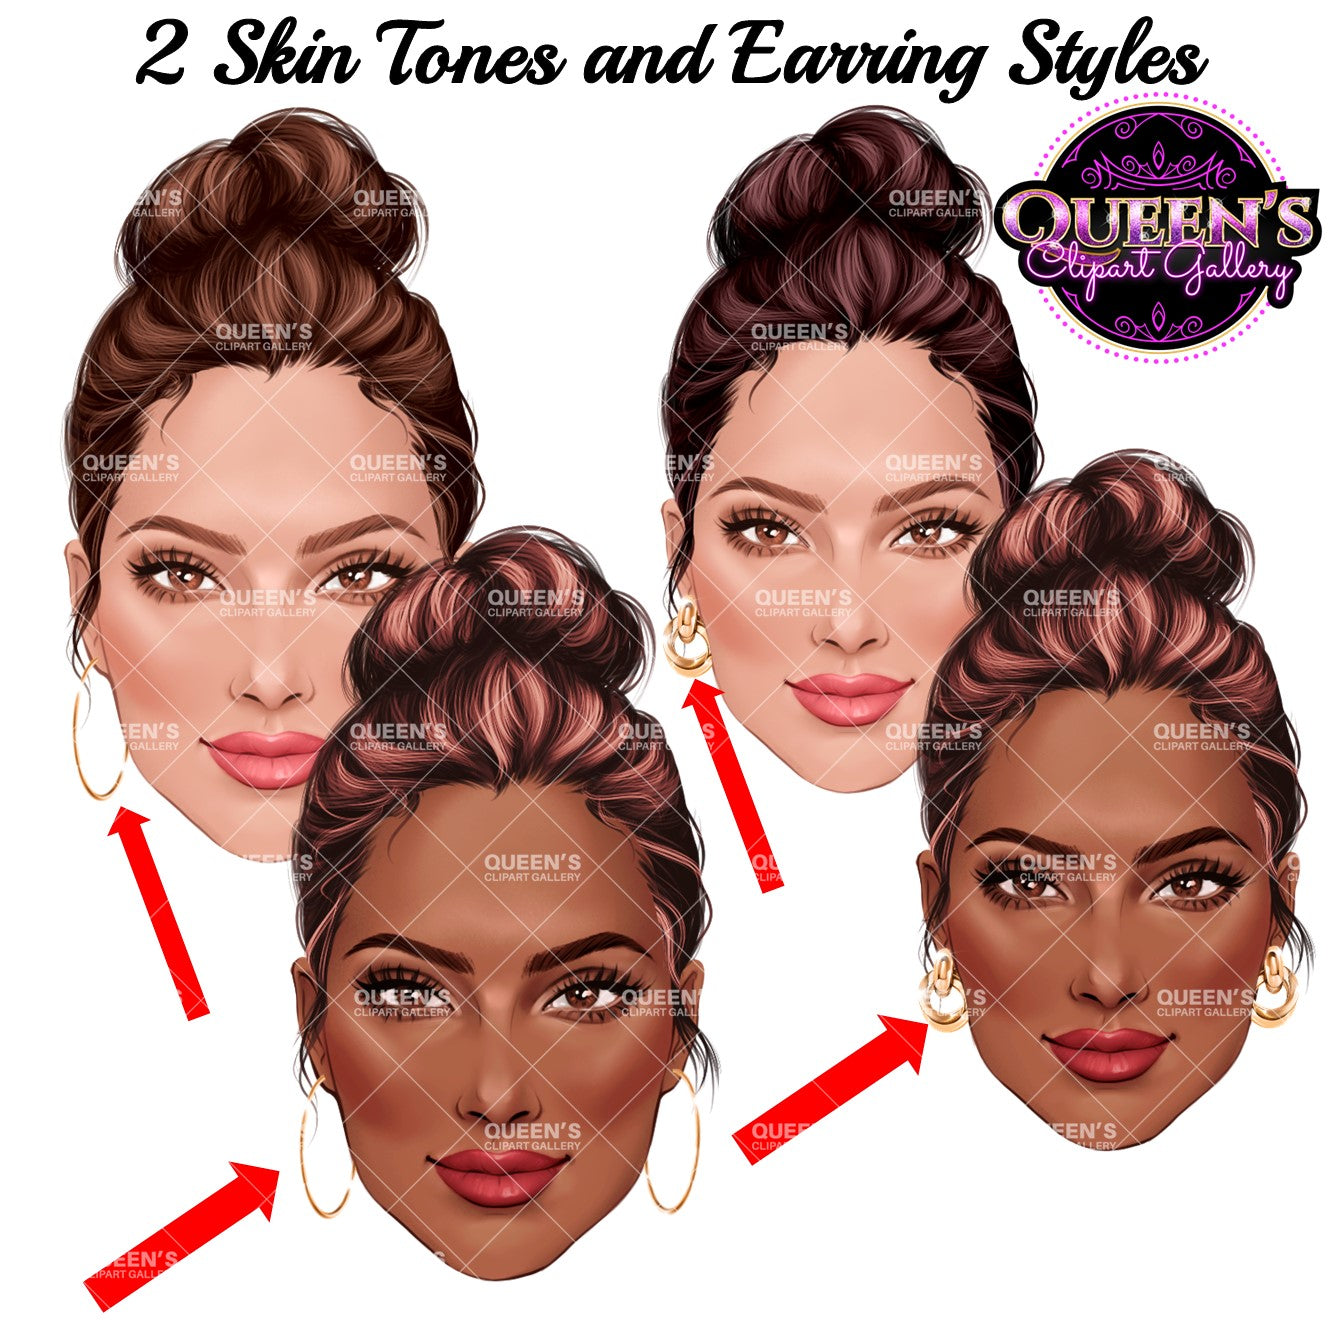 Woman face clipart, Hairstyles clipart, Face clipart, Face chart, Beauty clipart, Fashion clipart, Fashion girl clipart, Fashion PNG, Face